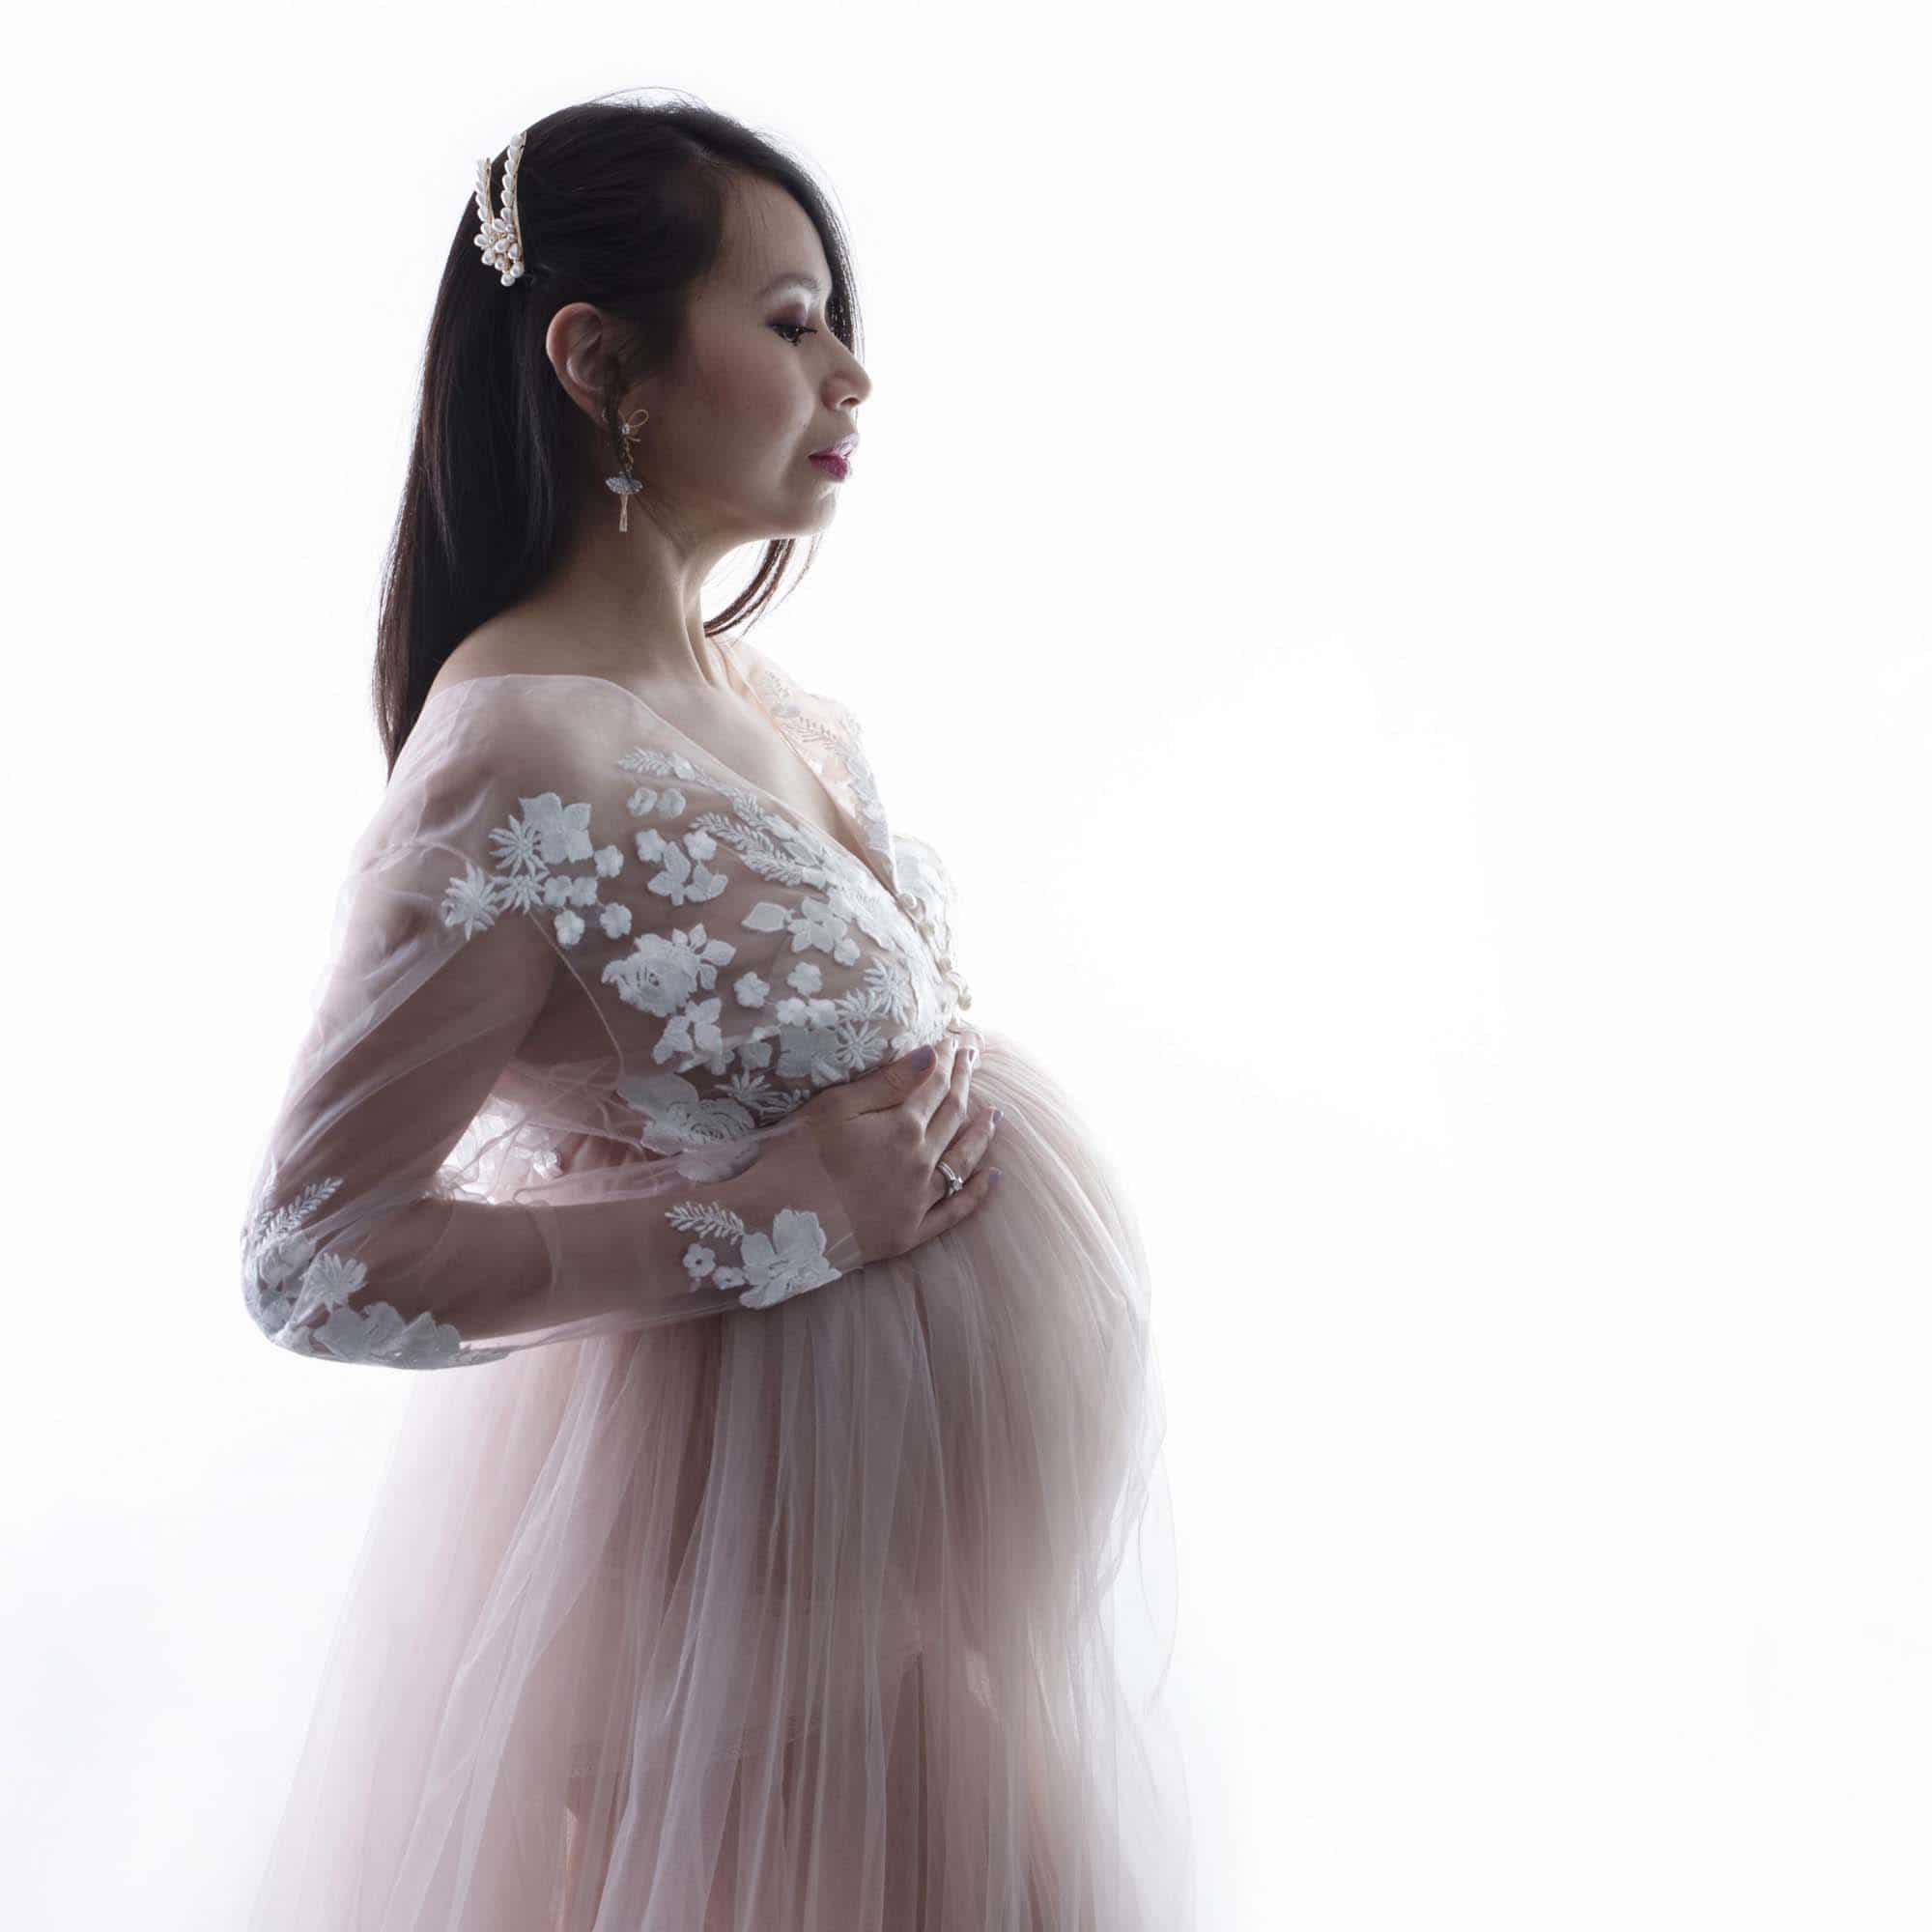 maternity image photographed by Baby Photographer Manchester